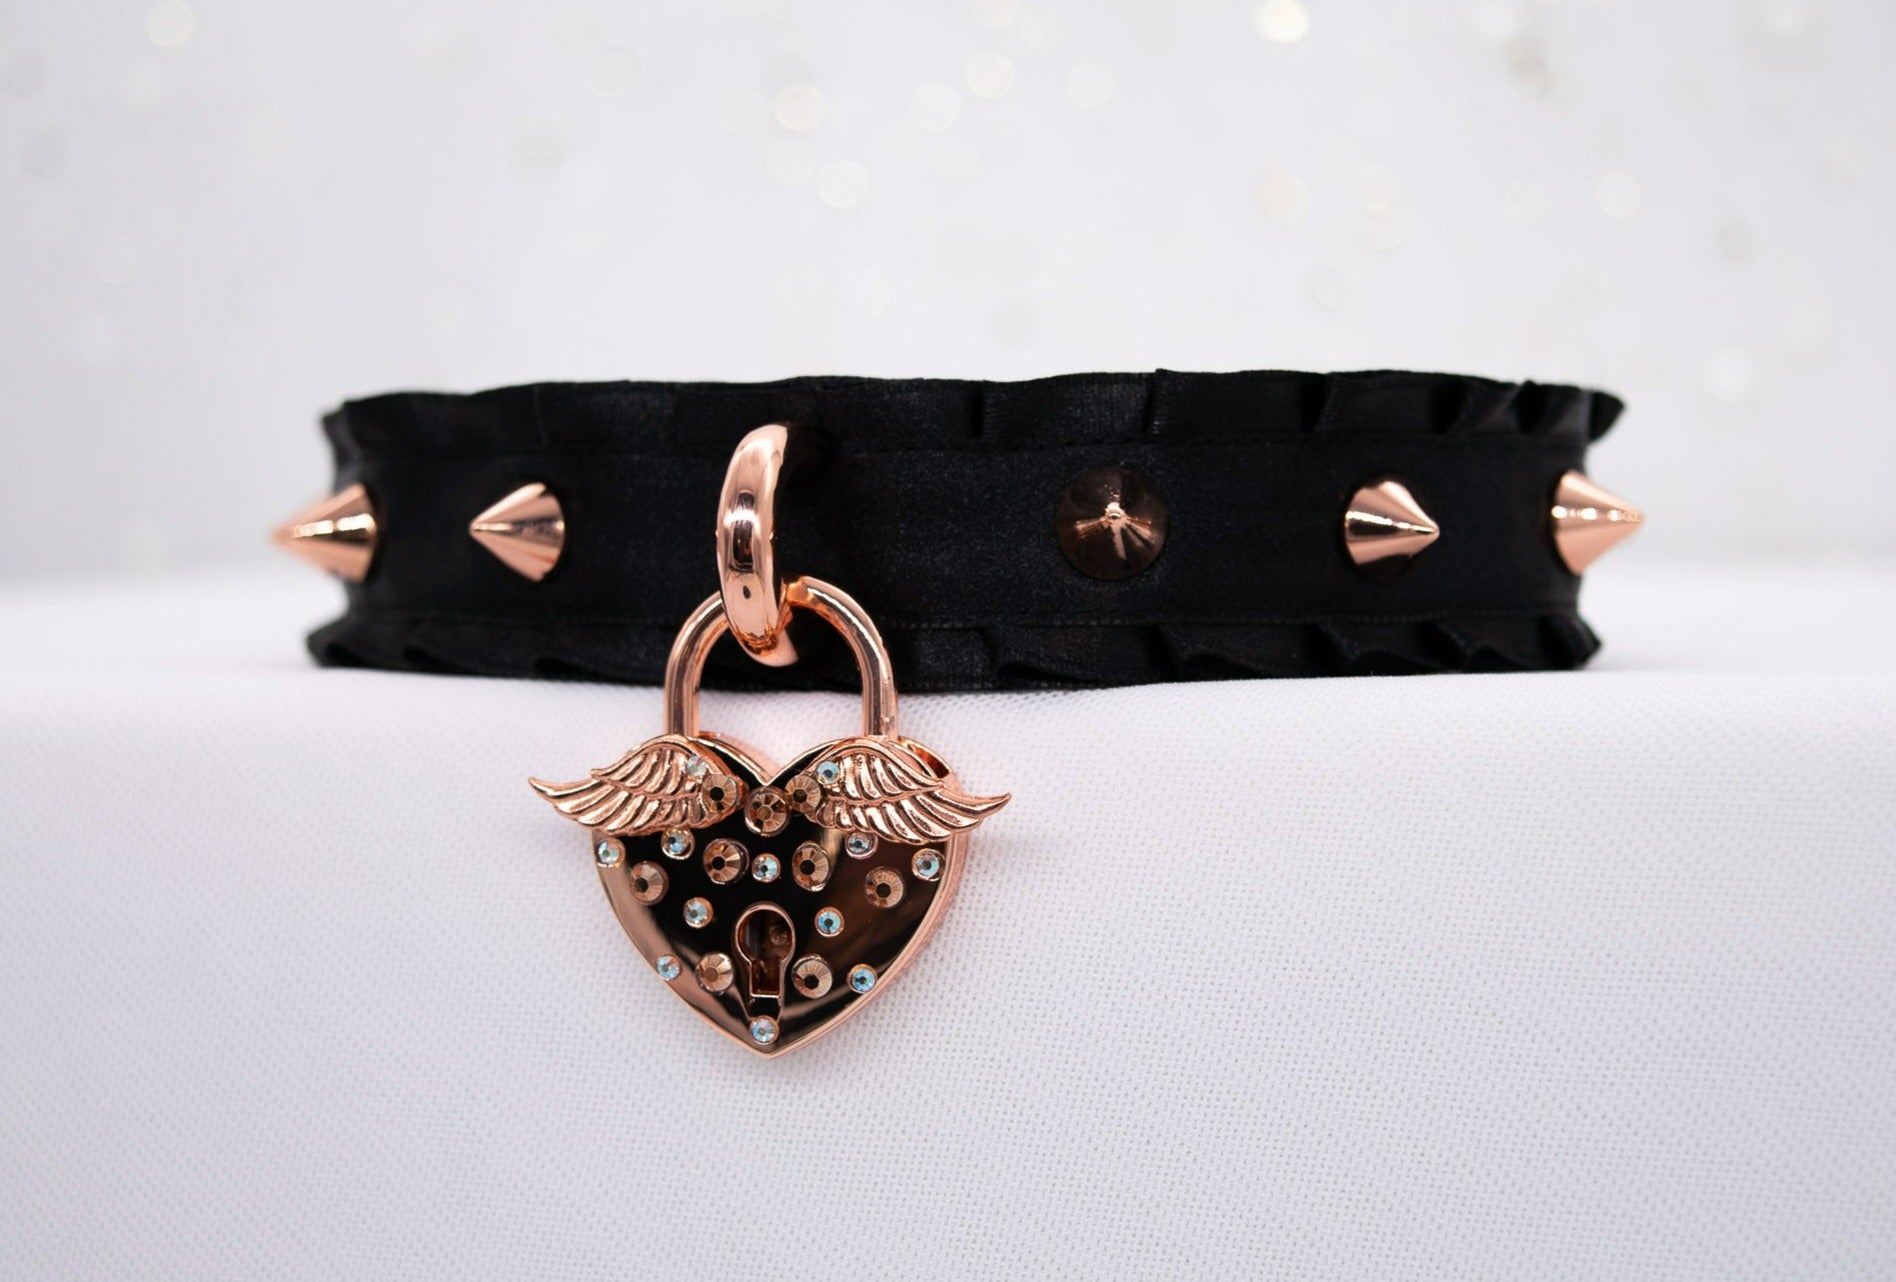 'Angel's Heart' - Black Spiked BDSM Collar in Rose Gold